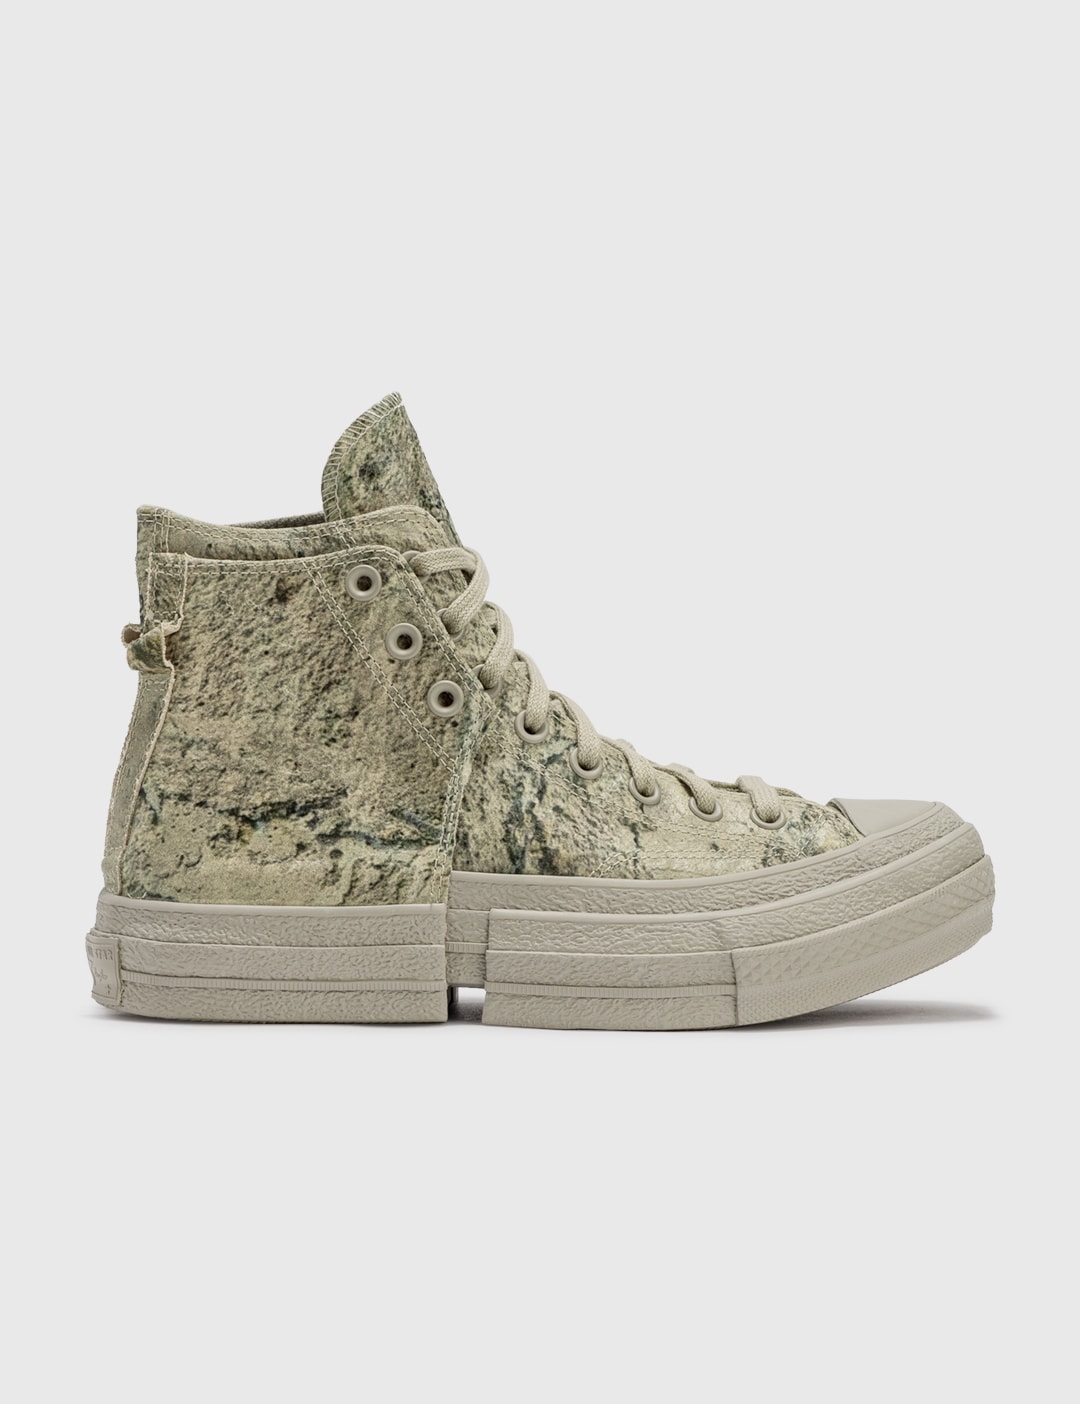 vorm Oost climax Converse - CONVERSE X FENG CHEN WANG | HBX - Globally Curated Fashion and  Lifestyle by Hypebeast